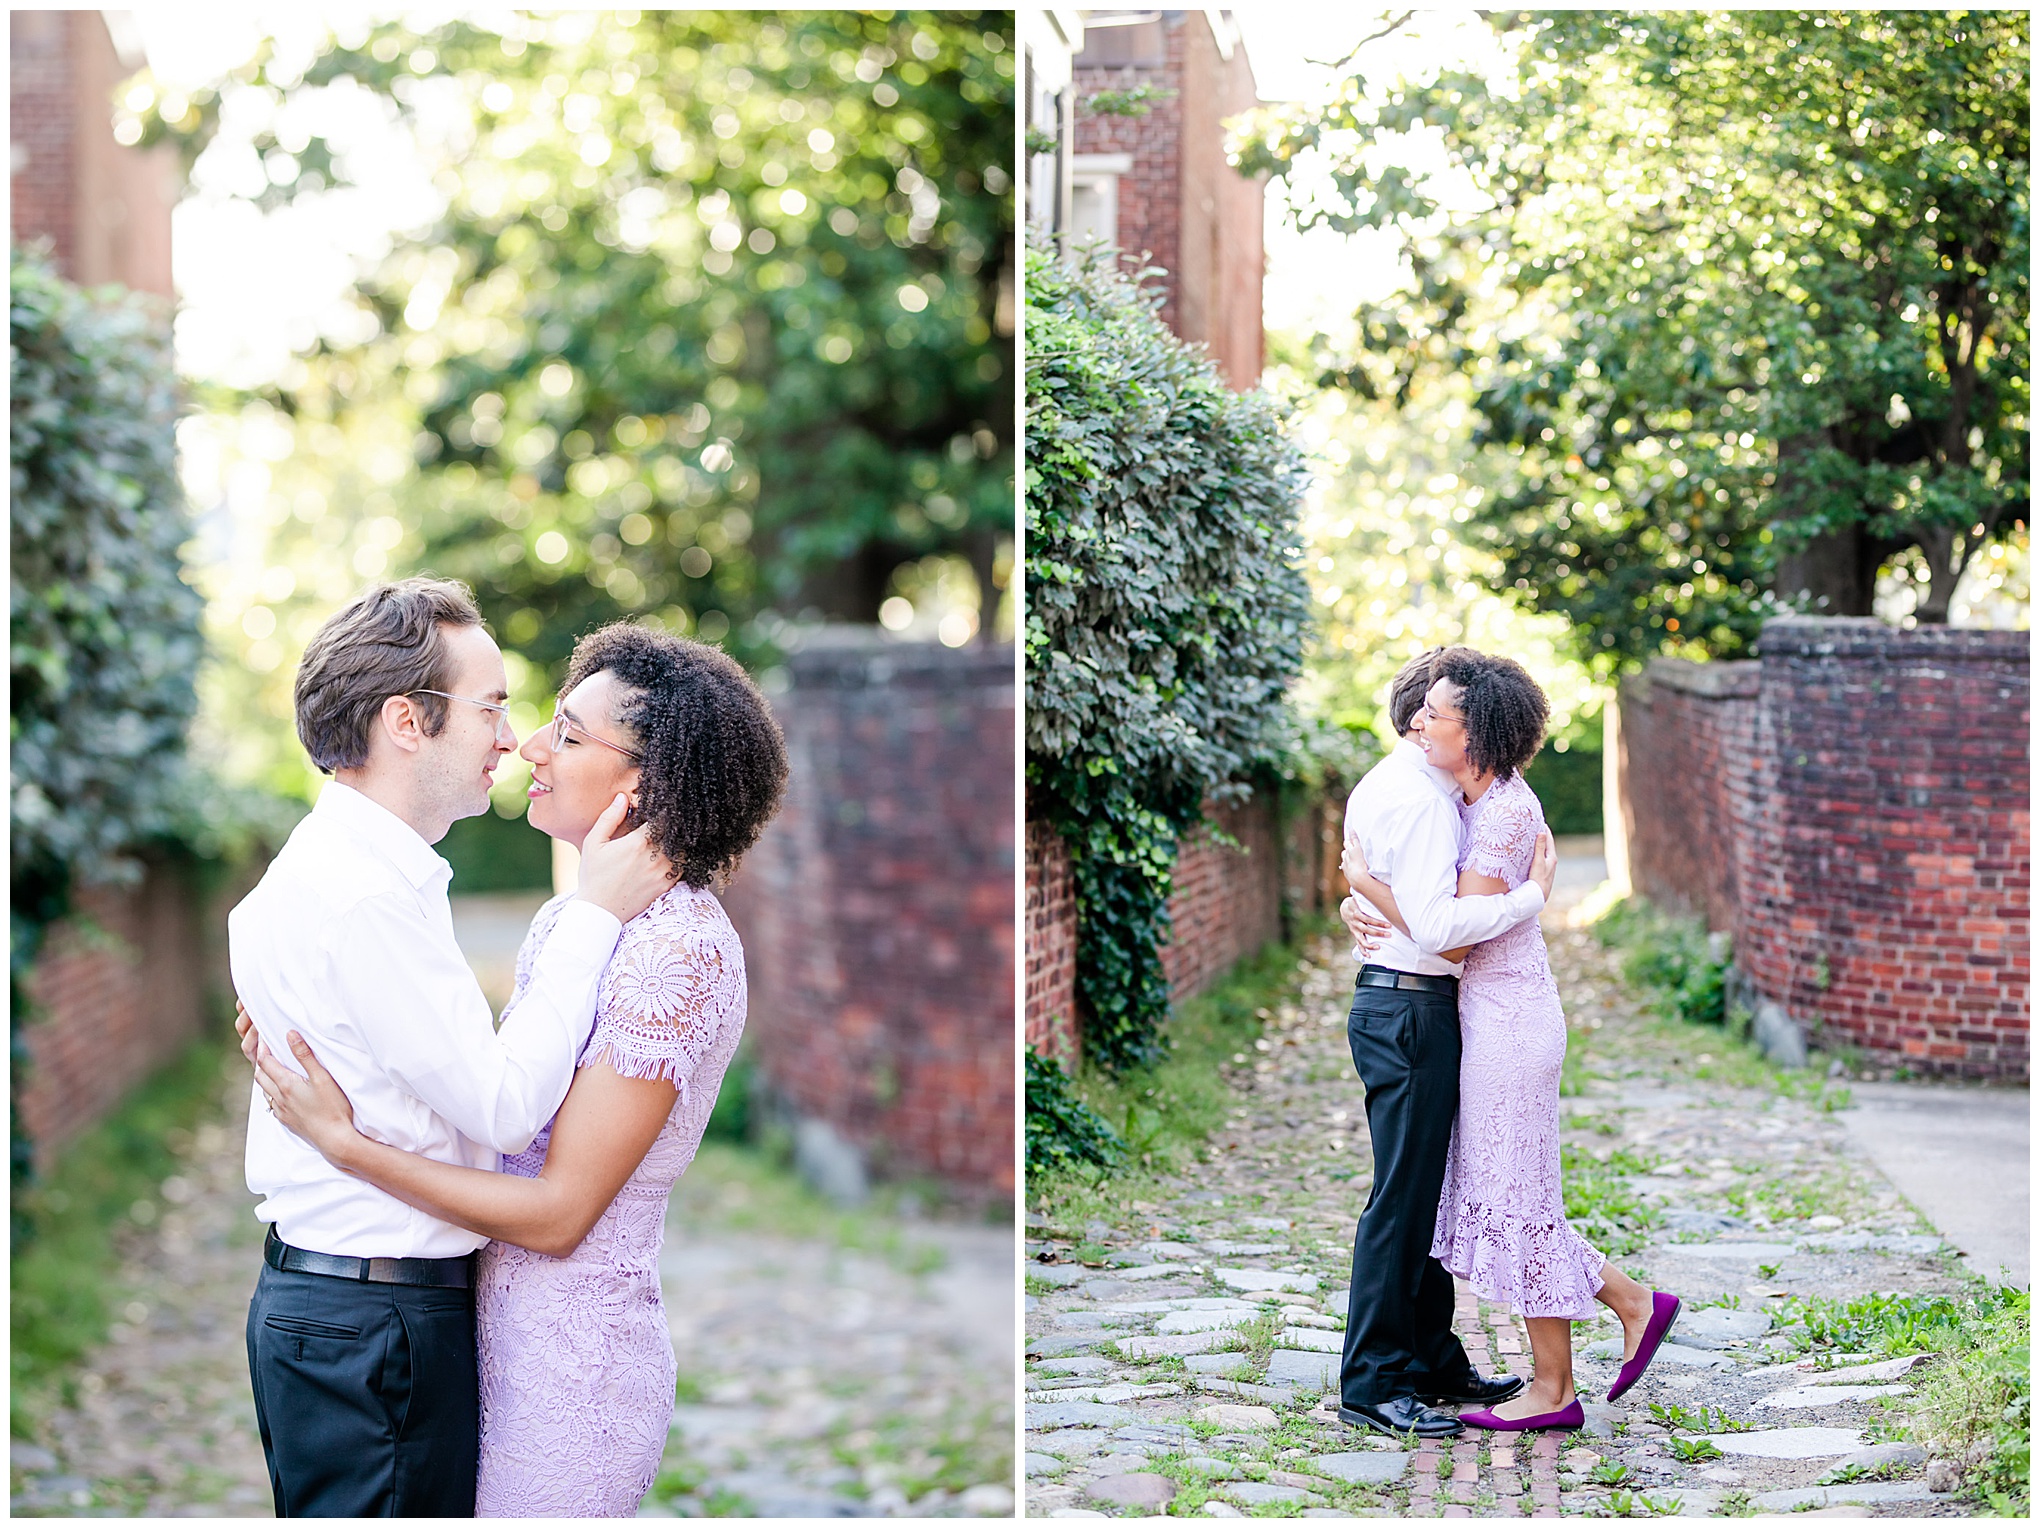 Old Town Alexandria wedding portraits, Alexandria Virginia wedding photographer, Alexandria Virginia photographer, Rachel E.H. Photography, D.C. wedding photographer, D.C. engagement photographer, D.C. photographer, Virginia wedding photographer, wedding photos, D.C. micro wedding photographer, D.C. elopement photographer, couple embracing, Lee St Alley